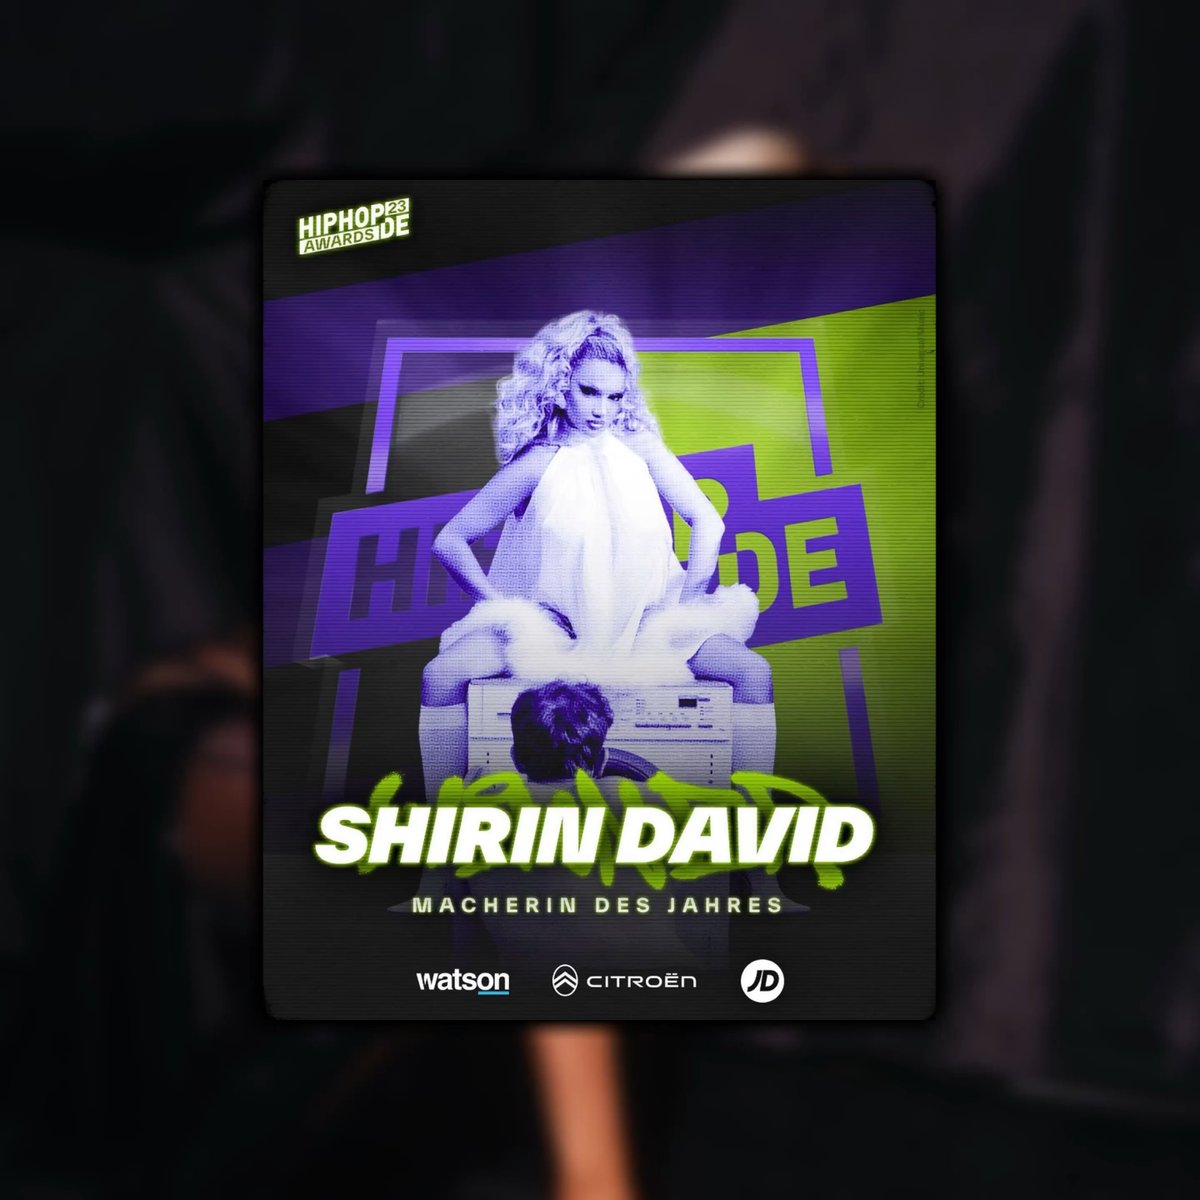 🏆| @ShirinDavid won the HipHopDE Awards 2023 in the category 'Macher*in des Jahres'.
— She is the only German Female Artist who won at the HipHopDE Awards 2023.

Congratulations @ShirinDavid 🥳